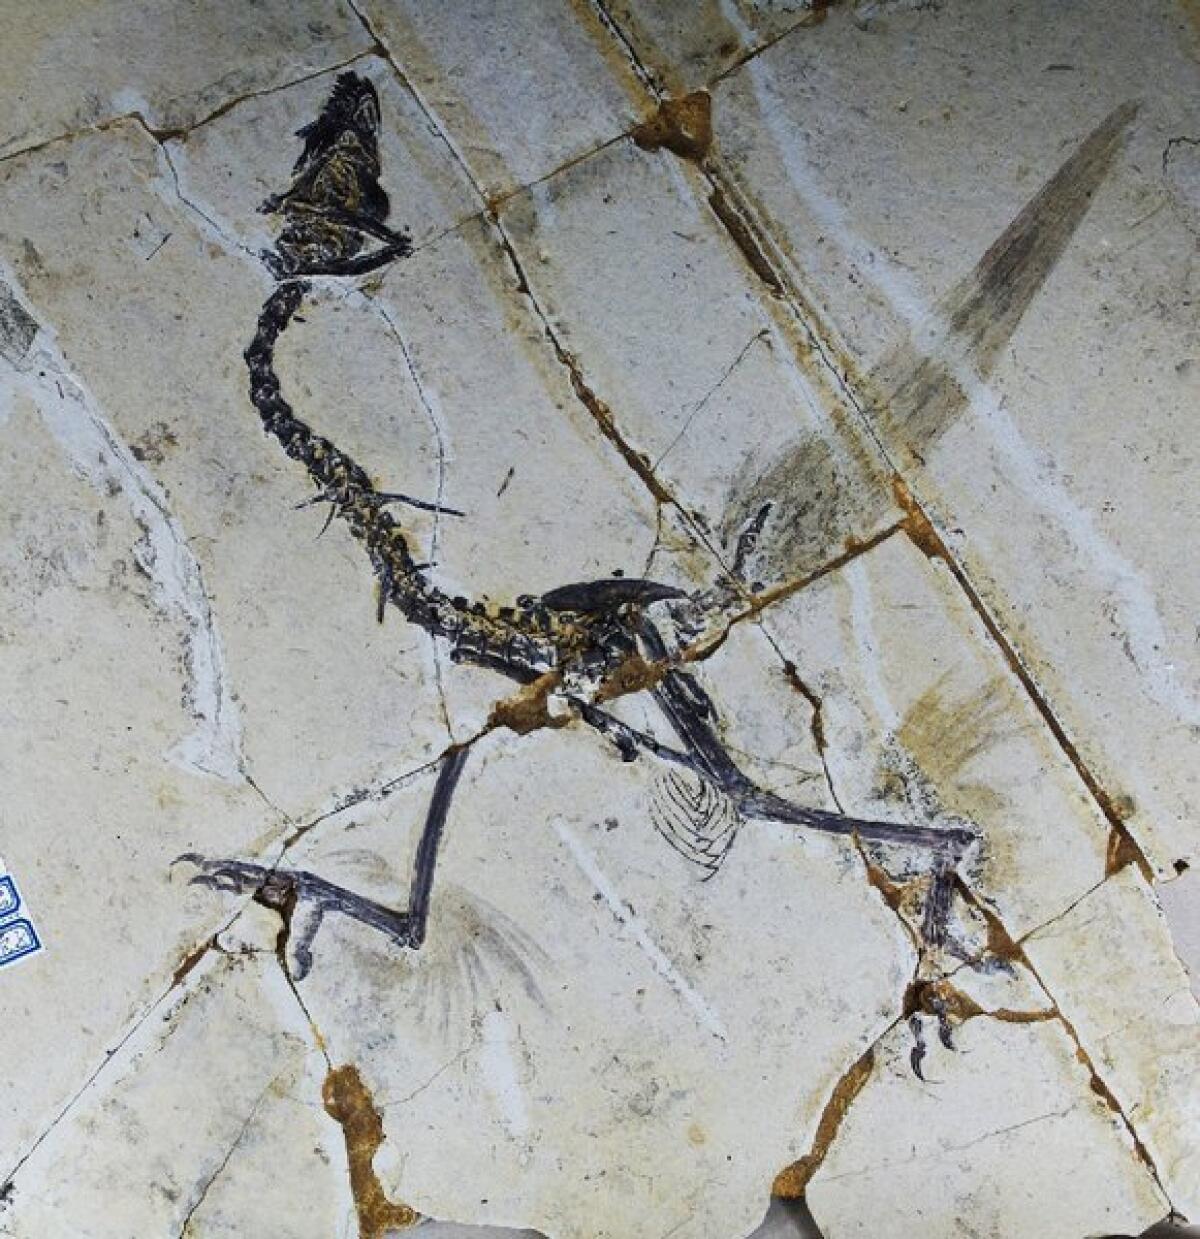 This handout photo shows a Sapeornis, a type of bird that until now was not believed to have hind feathers. But scientists in China say that some primitive birds used four wings more than 120 million years ago, before evolution led them to ditch their hind feathers in favor of scaly feet.